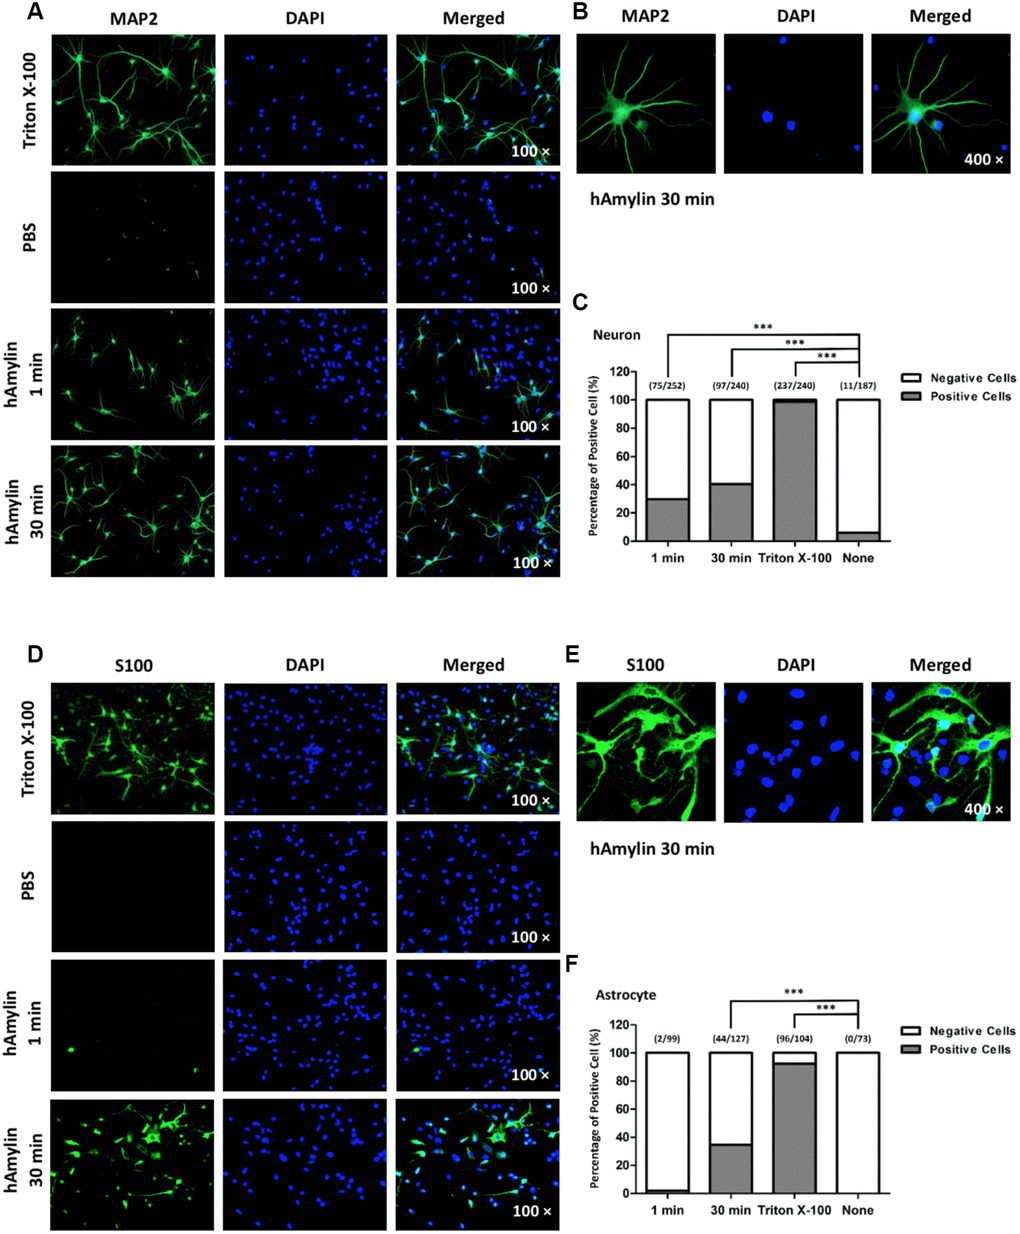 The permeabilization effects of hAmylin on neurons and astrocytes. (A, B) Neuron-specific fluorescence (MAP2) was observed in neurons after their incubation with Triton X-100. When Triton X-100 was replaced with PBS, intracellular fluorescence was almost invisible. However, when 10 μM hAmylin was used instead of Triton X-100 (incubation for 1 min or 30 min), intracellular fluorescence could still be observed in neurons. (C) The percentage of positive cells was 31.01% for 1 min incubation and 35.15% for 30 min incubation. (D–F) In contrast, astrocyte-specific fluorescence (S100) was not clearly observed when 10 μM hAmylin was used instead of Triton X-100 (incubation for 1 min). However, when the incubation time was prolonged to 30 min, intracellular fluorescence could be observed (D, E) in 34.65% of astrocytes (F). ***p 